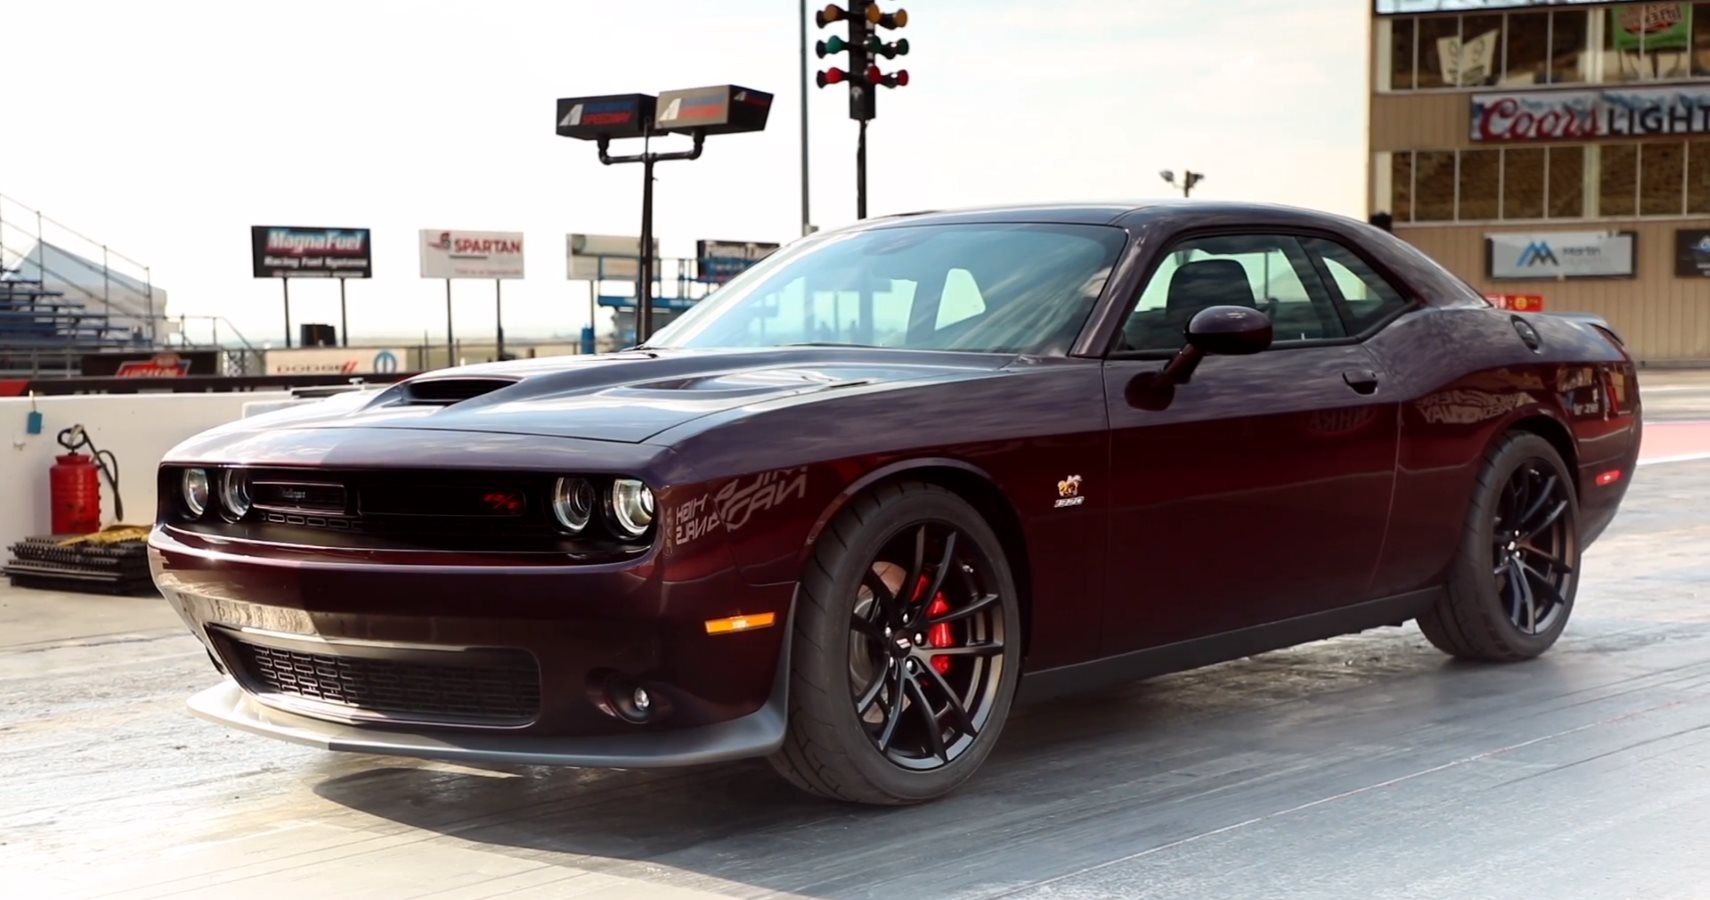 Dodge Challenger R/T Scat Pack 1320 Trim Is Inspired By Demon